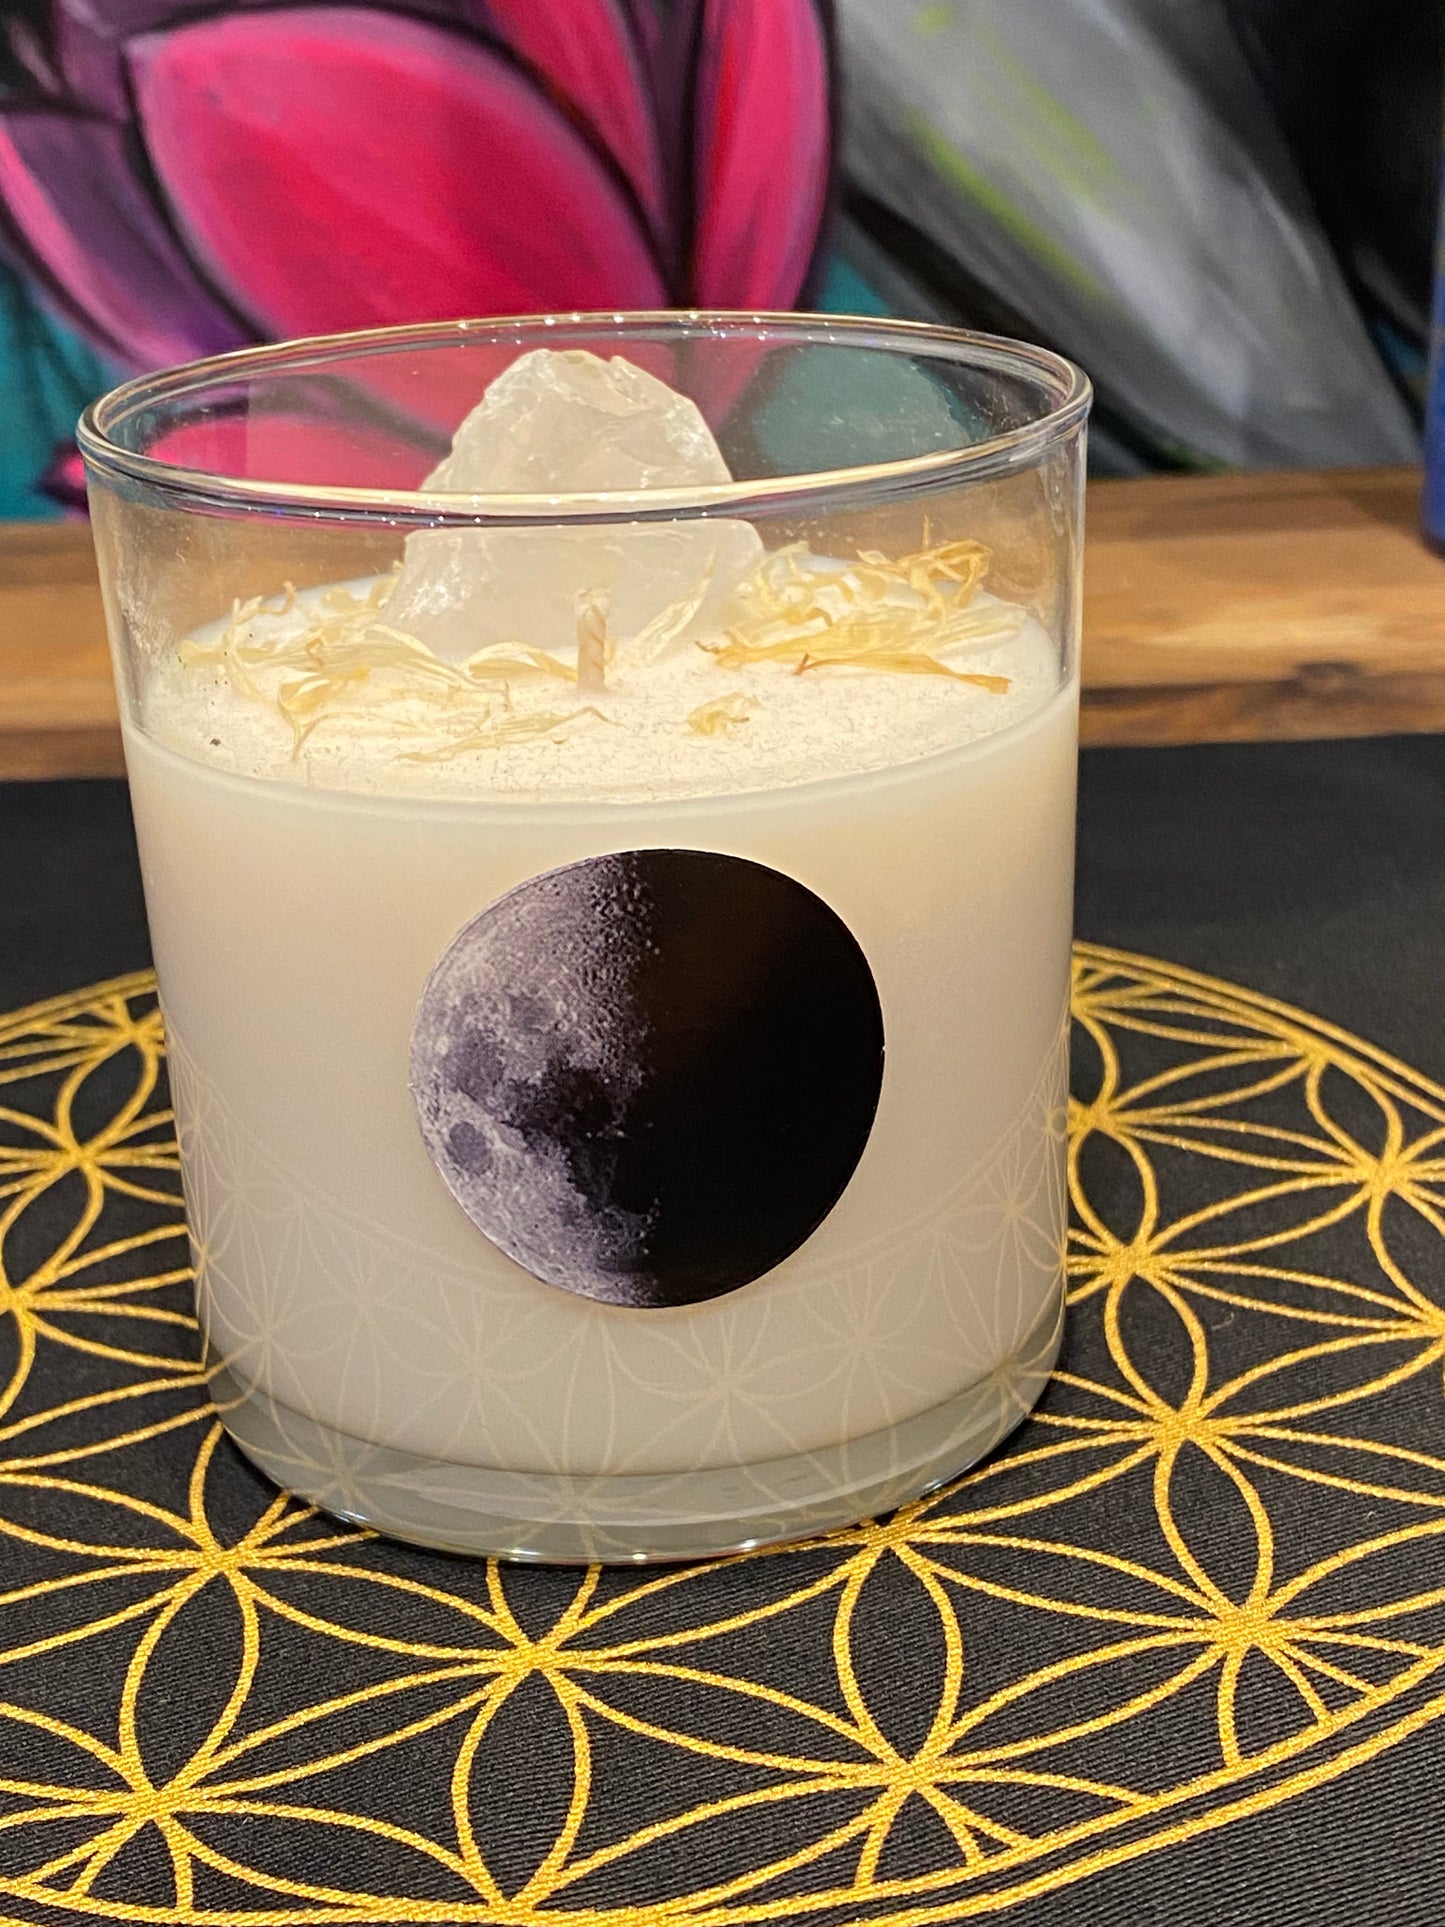 Moonchild Crystal Candle made by Lunastry